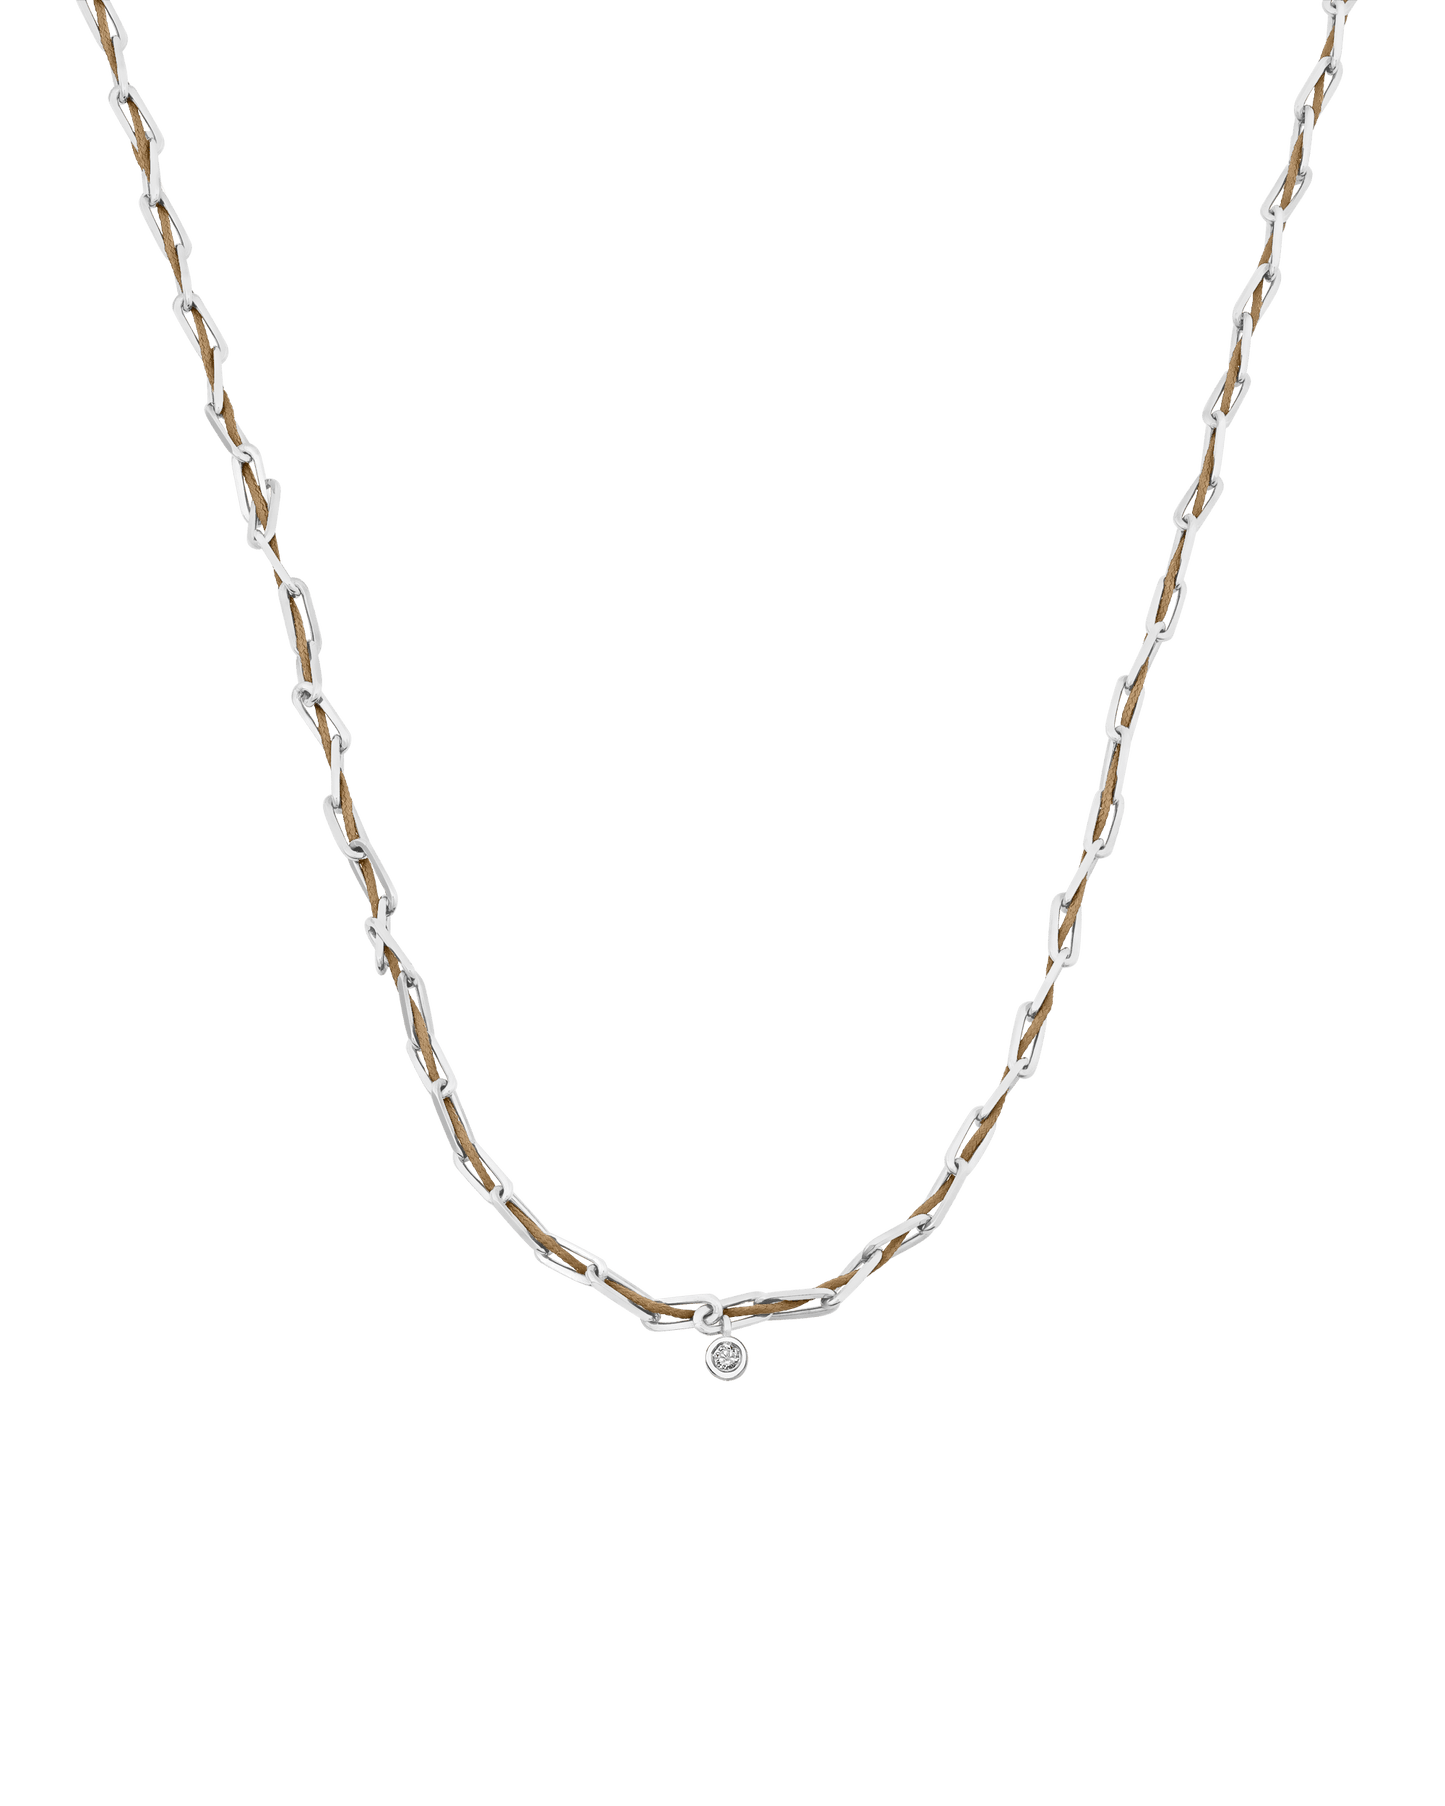 Twine Diamond Necklace - 925 Sterling Silver Necklaces magal-dev Camel Medium: 0.05ct 16"